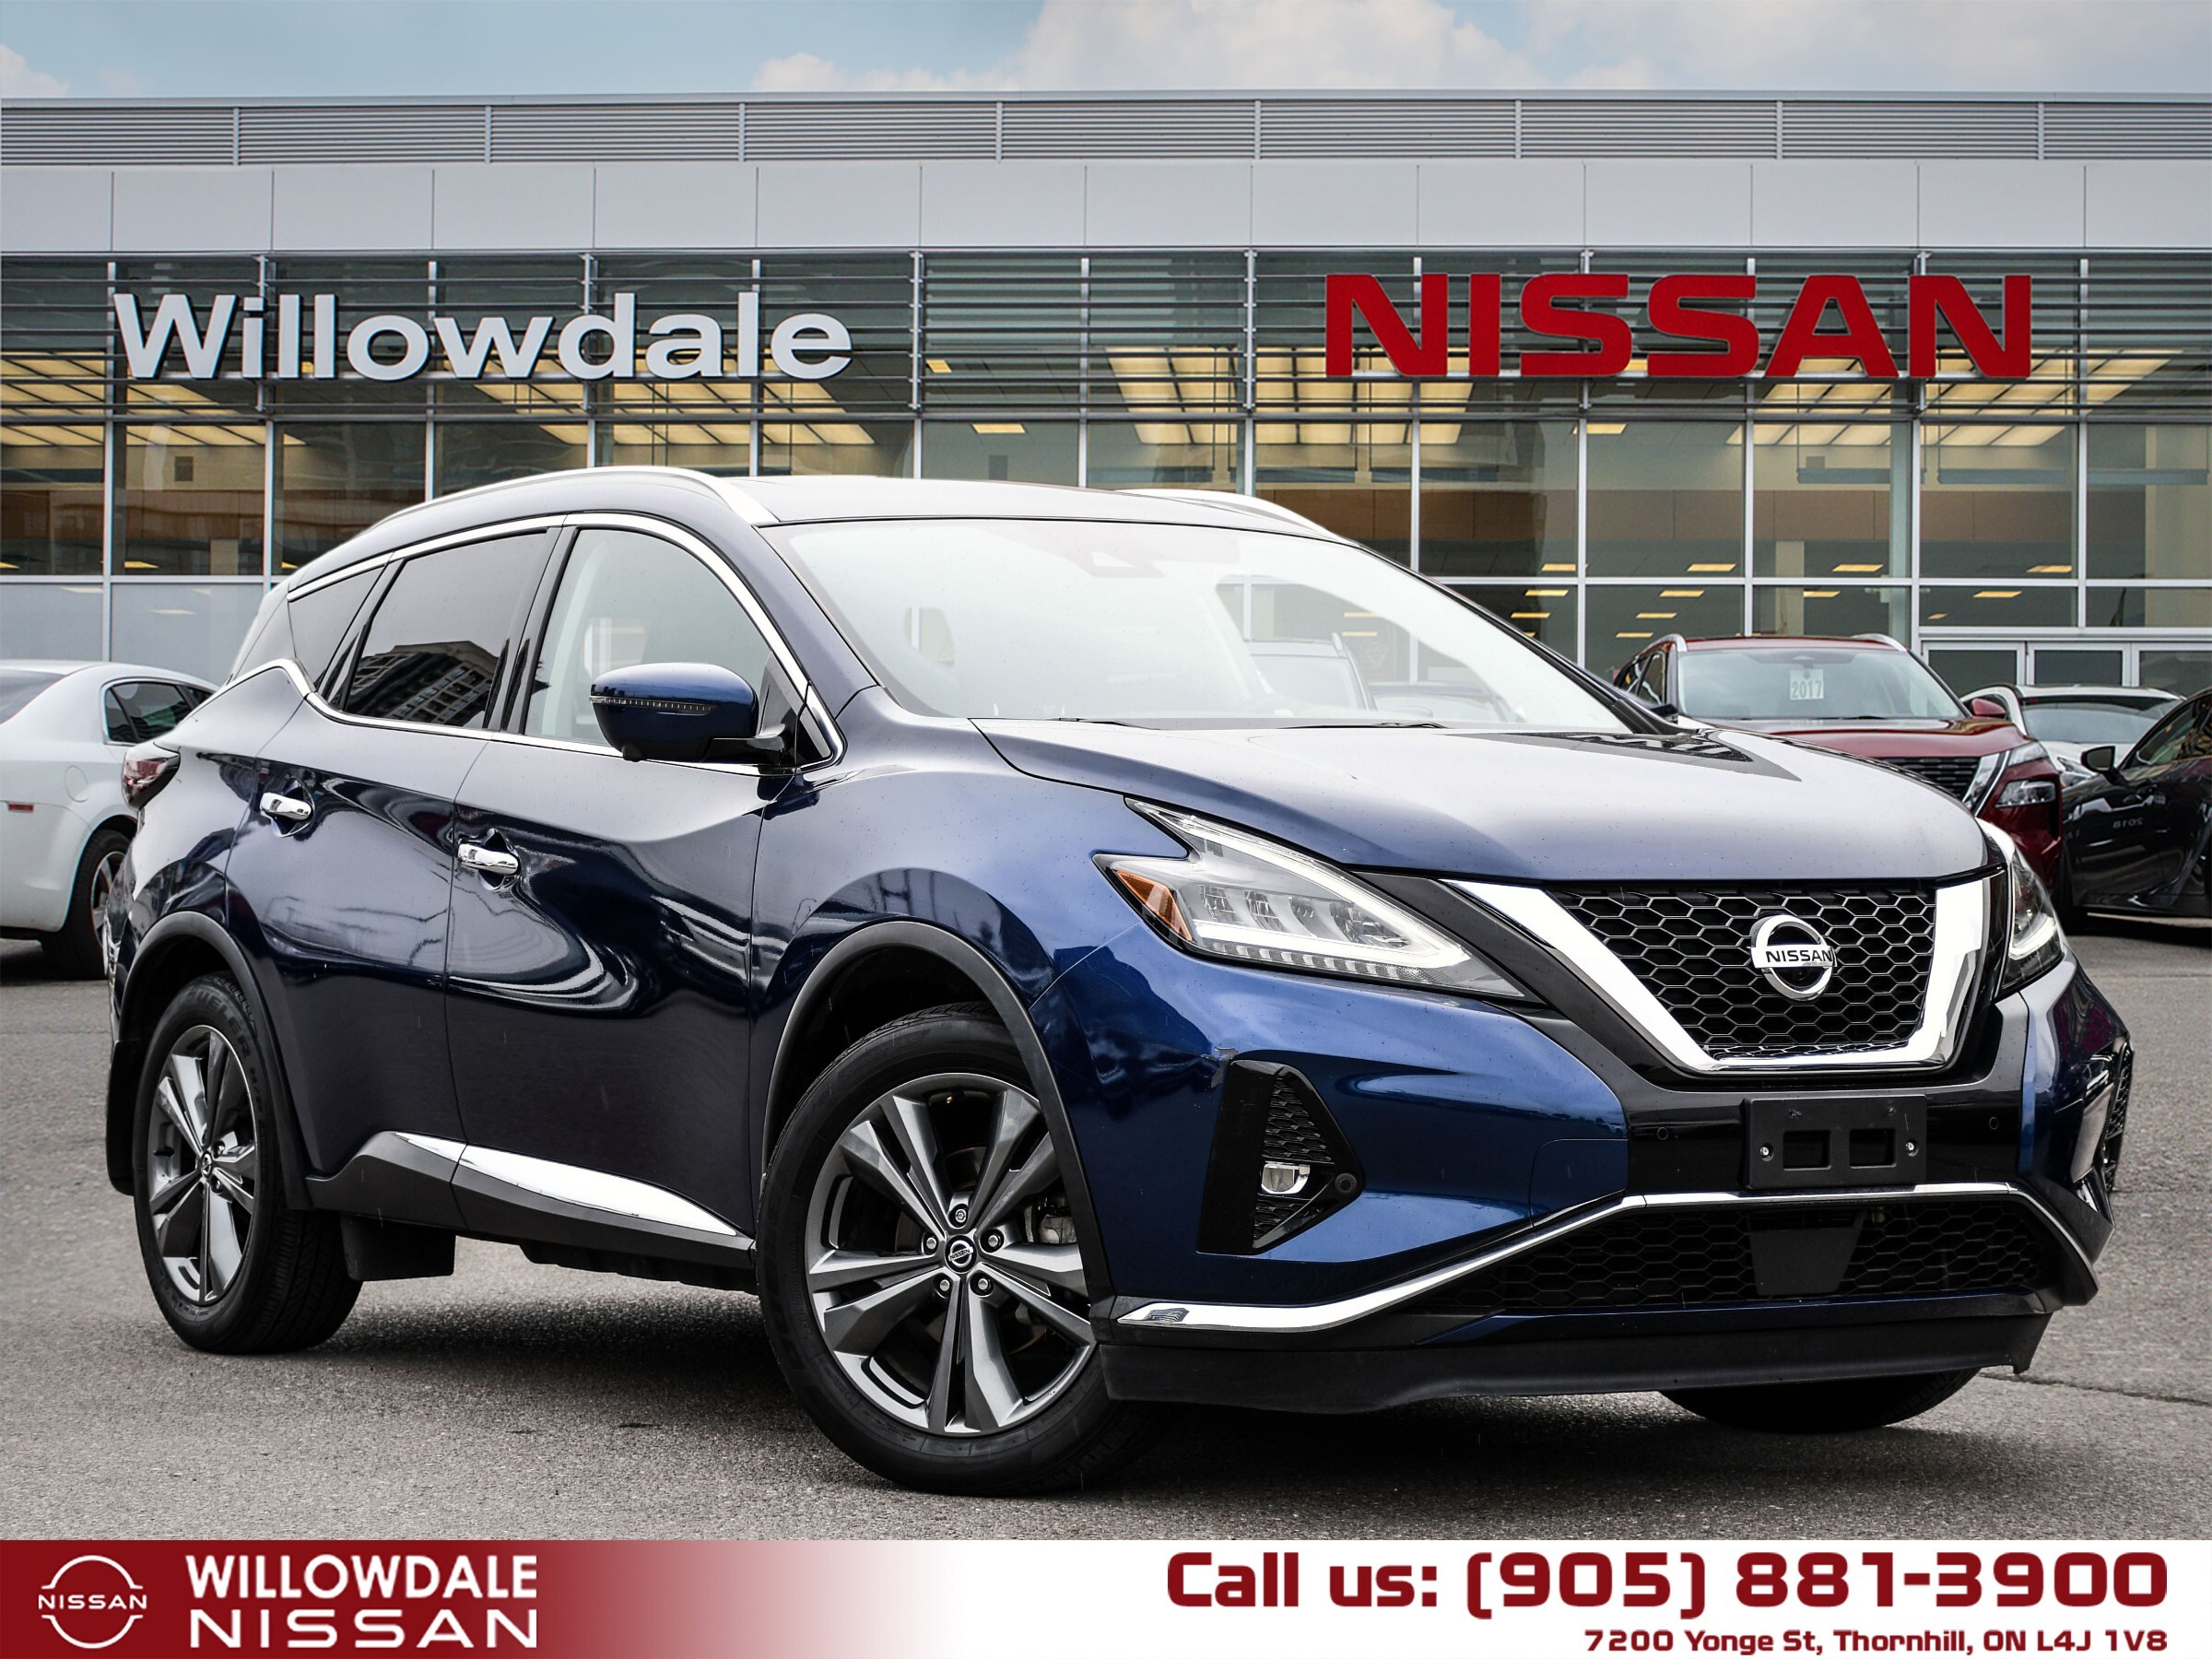 2020 Nissan Murano Platinum - SALE EVENT MAY 24- MAY 25